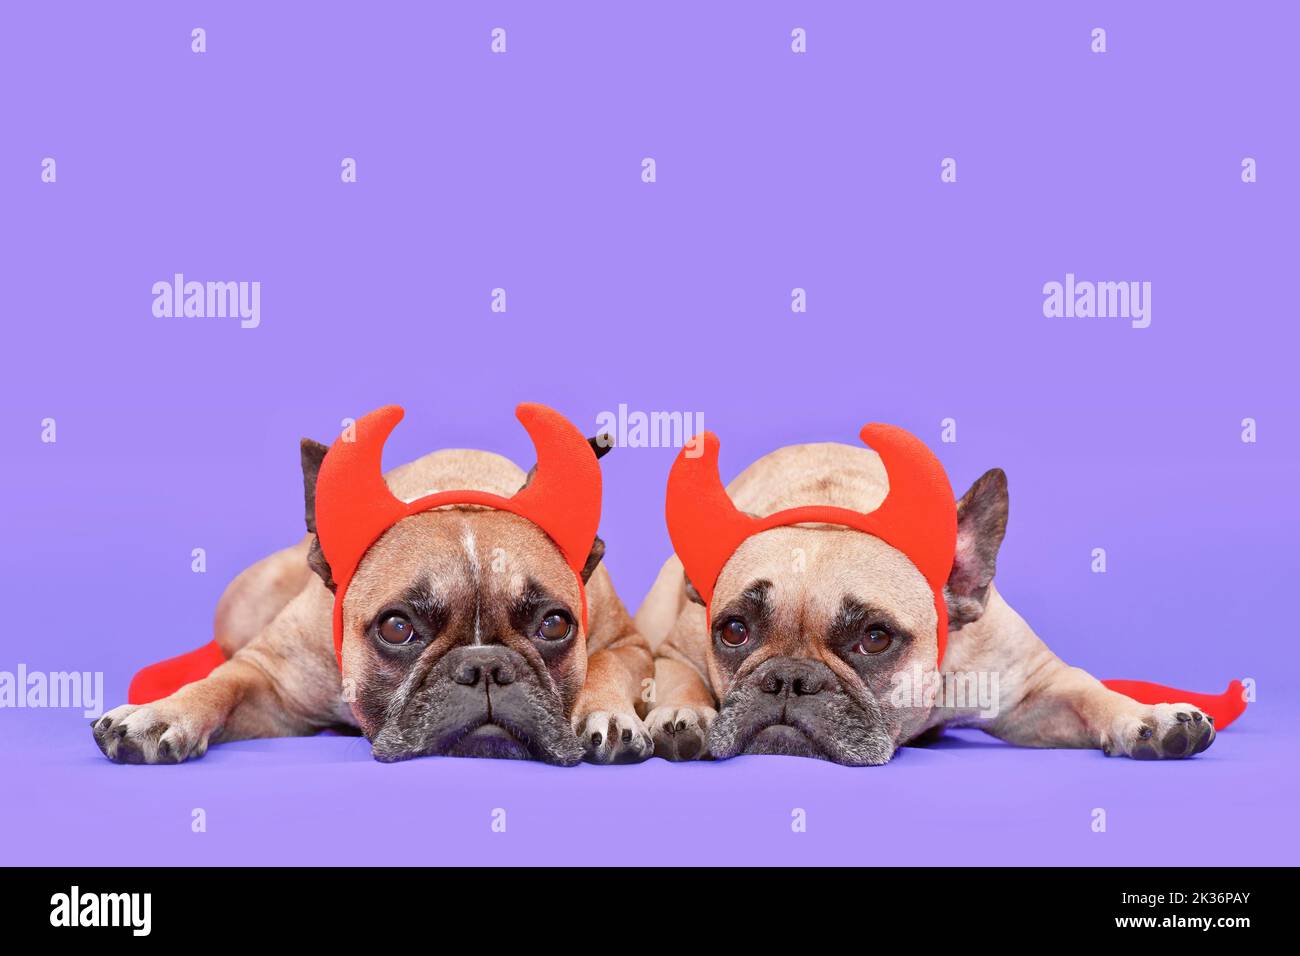 Pair of Halloween French Bulldog dogs wearing red devil horns costume headbands on purple background with copy space Stock Photo